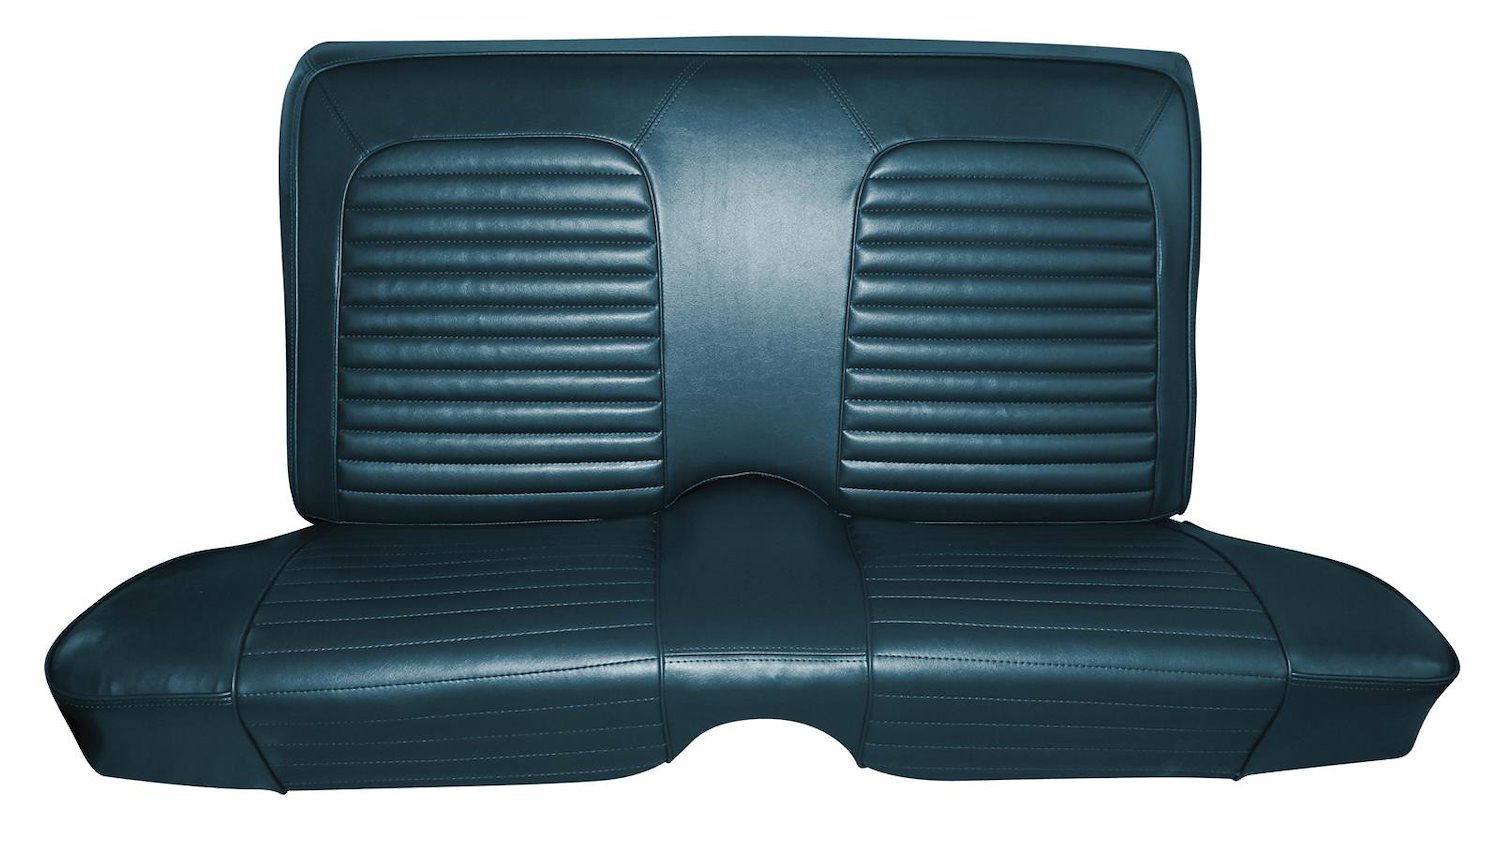 1967 Ford Fairlane 500XL, GT and GTA 2-Door Hardtop Interior Rear Bench Seat Upholstery Set